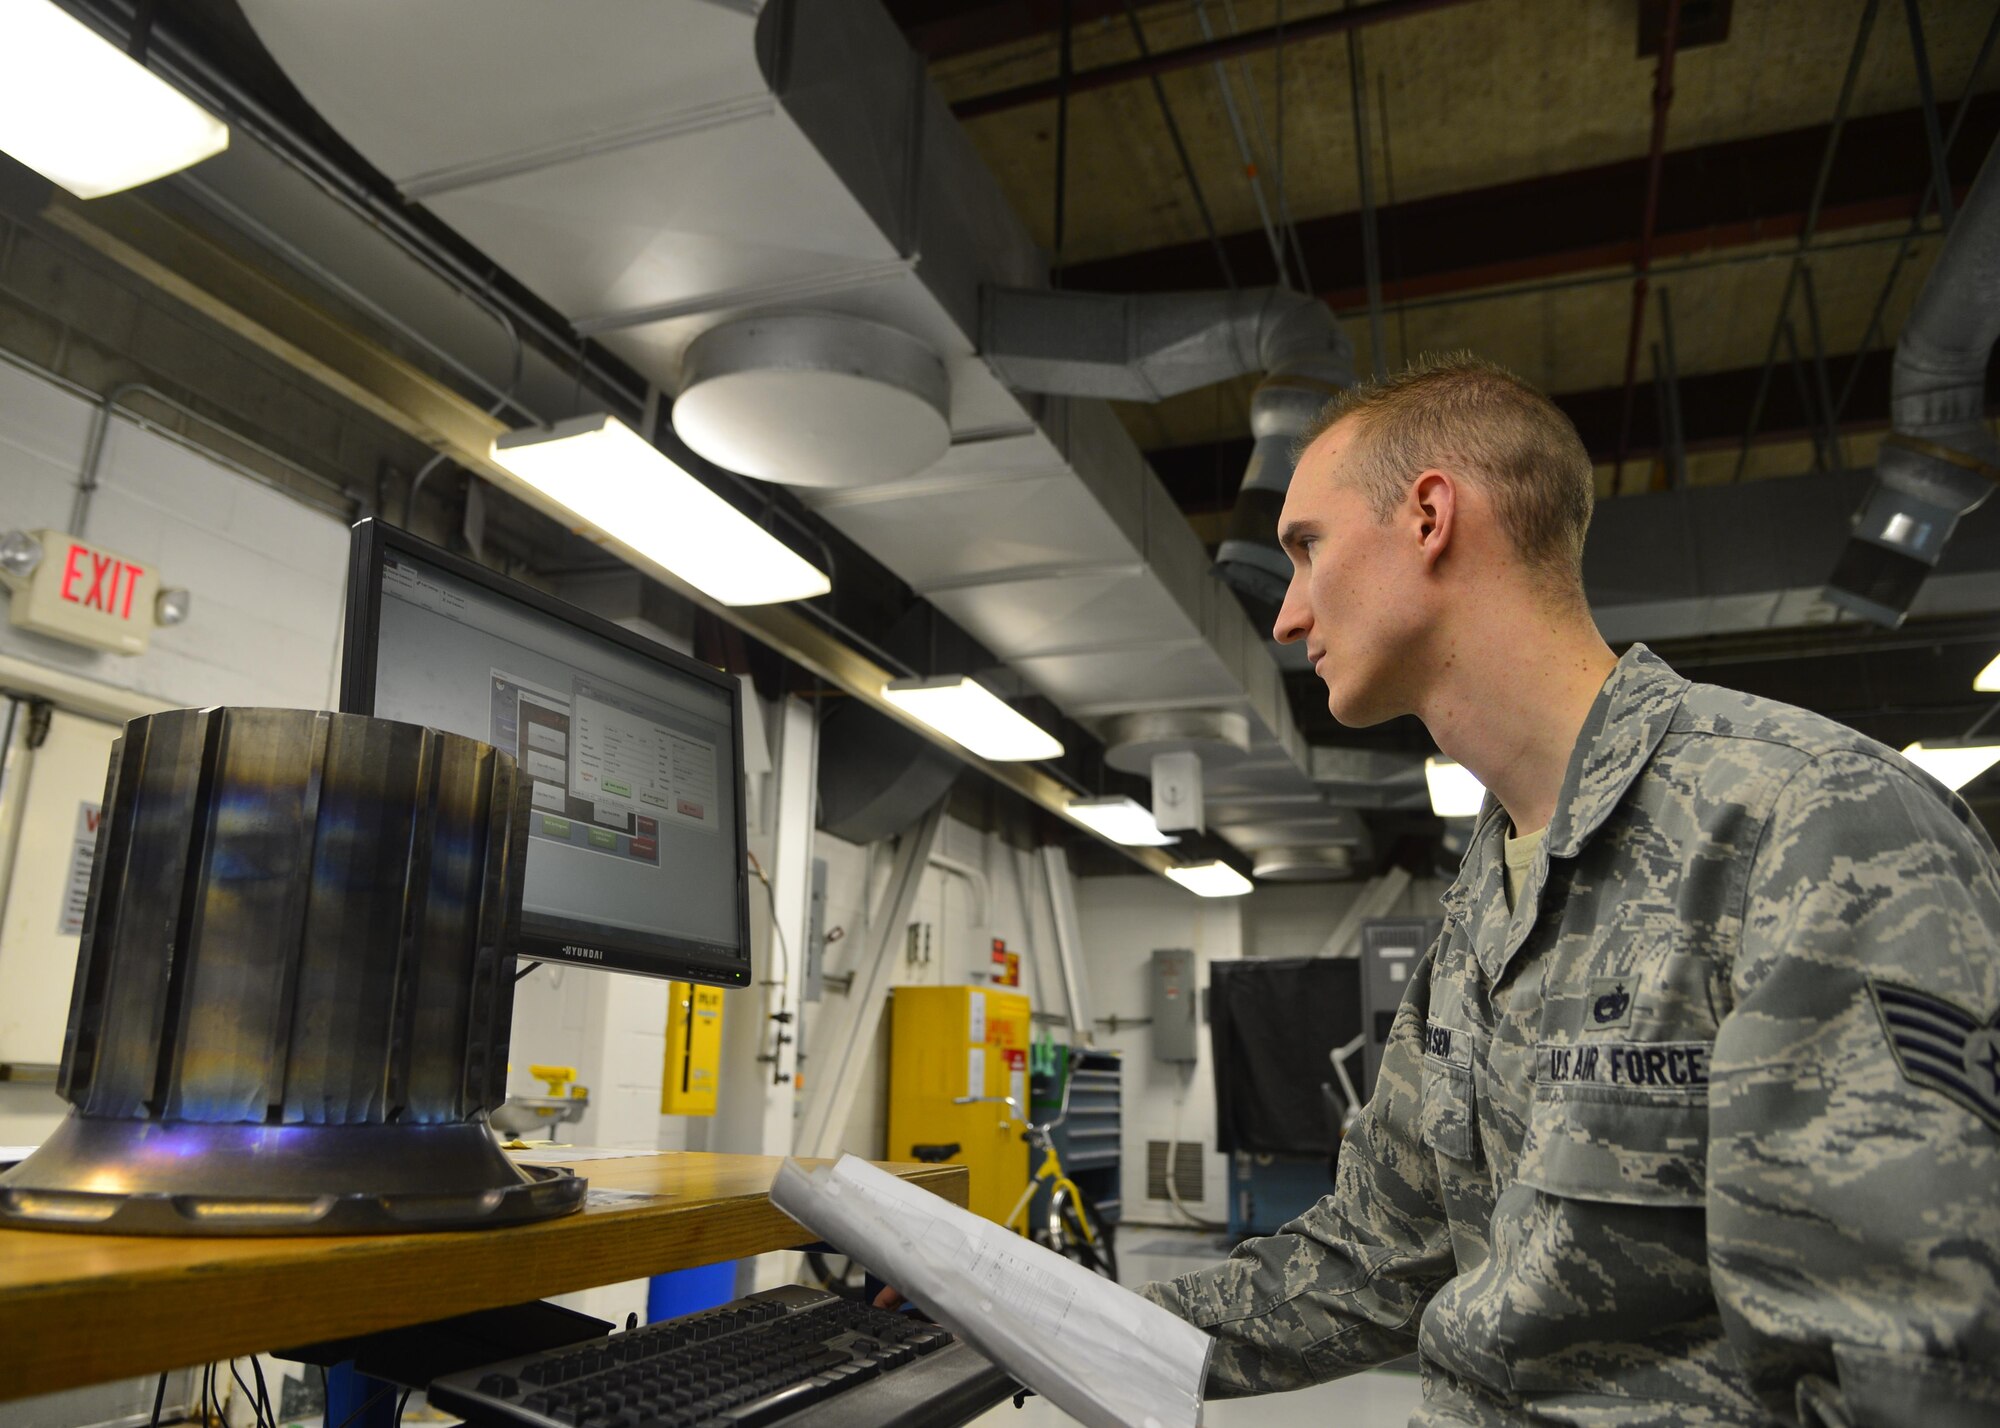 Staff Sgt. Chad Ericksen inputs data about a torque tube into the Parts, Inspection, Turnover (PIT) log March 12, 2015, at Dover Air Force Base, Del. Ericksen created the PIT program in 2012 to transition from log books to a more modern format with better report accuracy. Ericksen is a non-destructive inspection craftsman assigned to the 436th Maintenance Squadron. (U.S. Air Force photo/Airman 1st Class William Johnson)